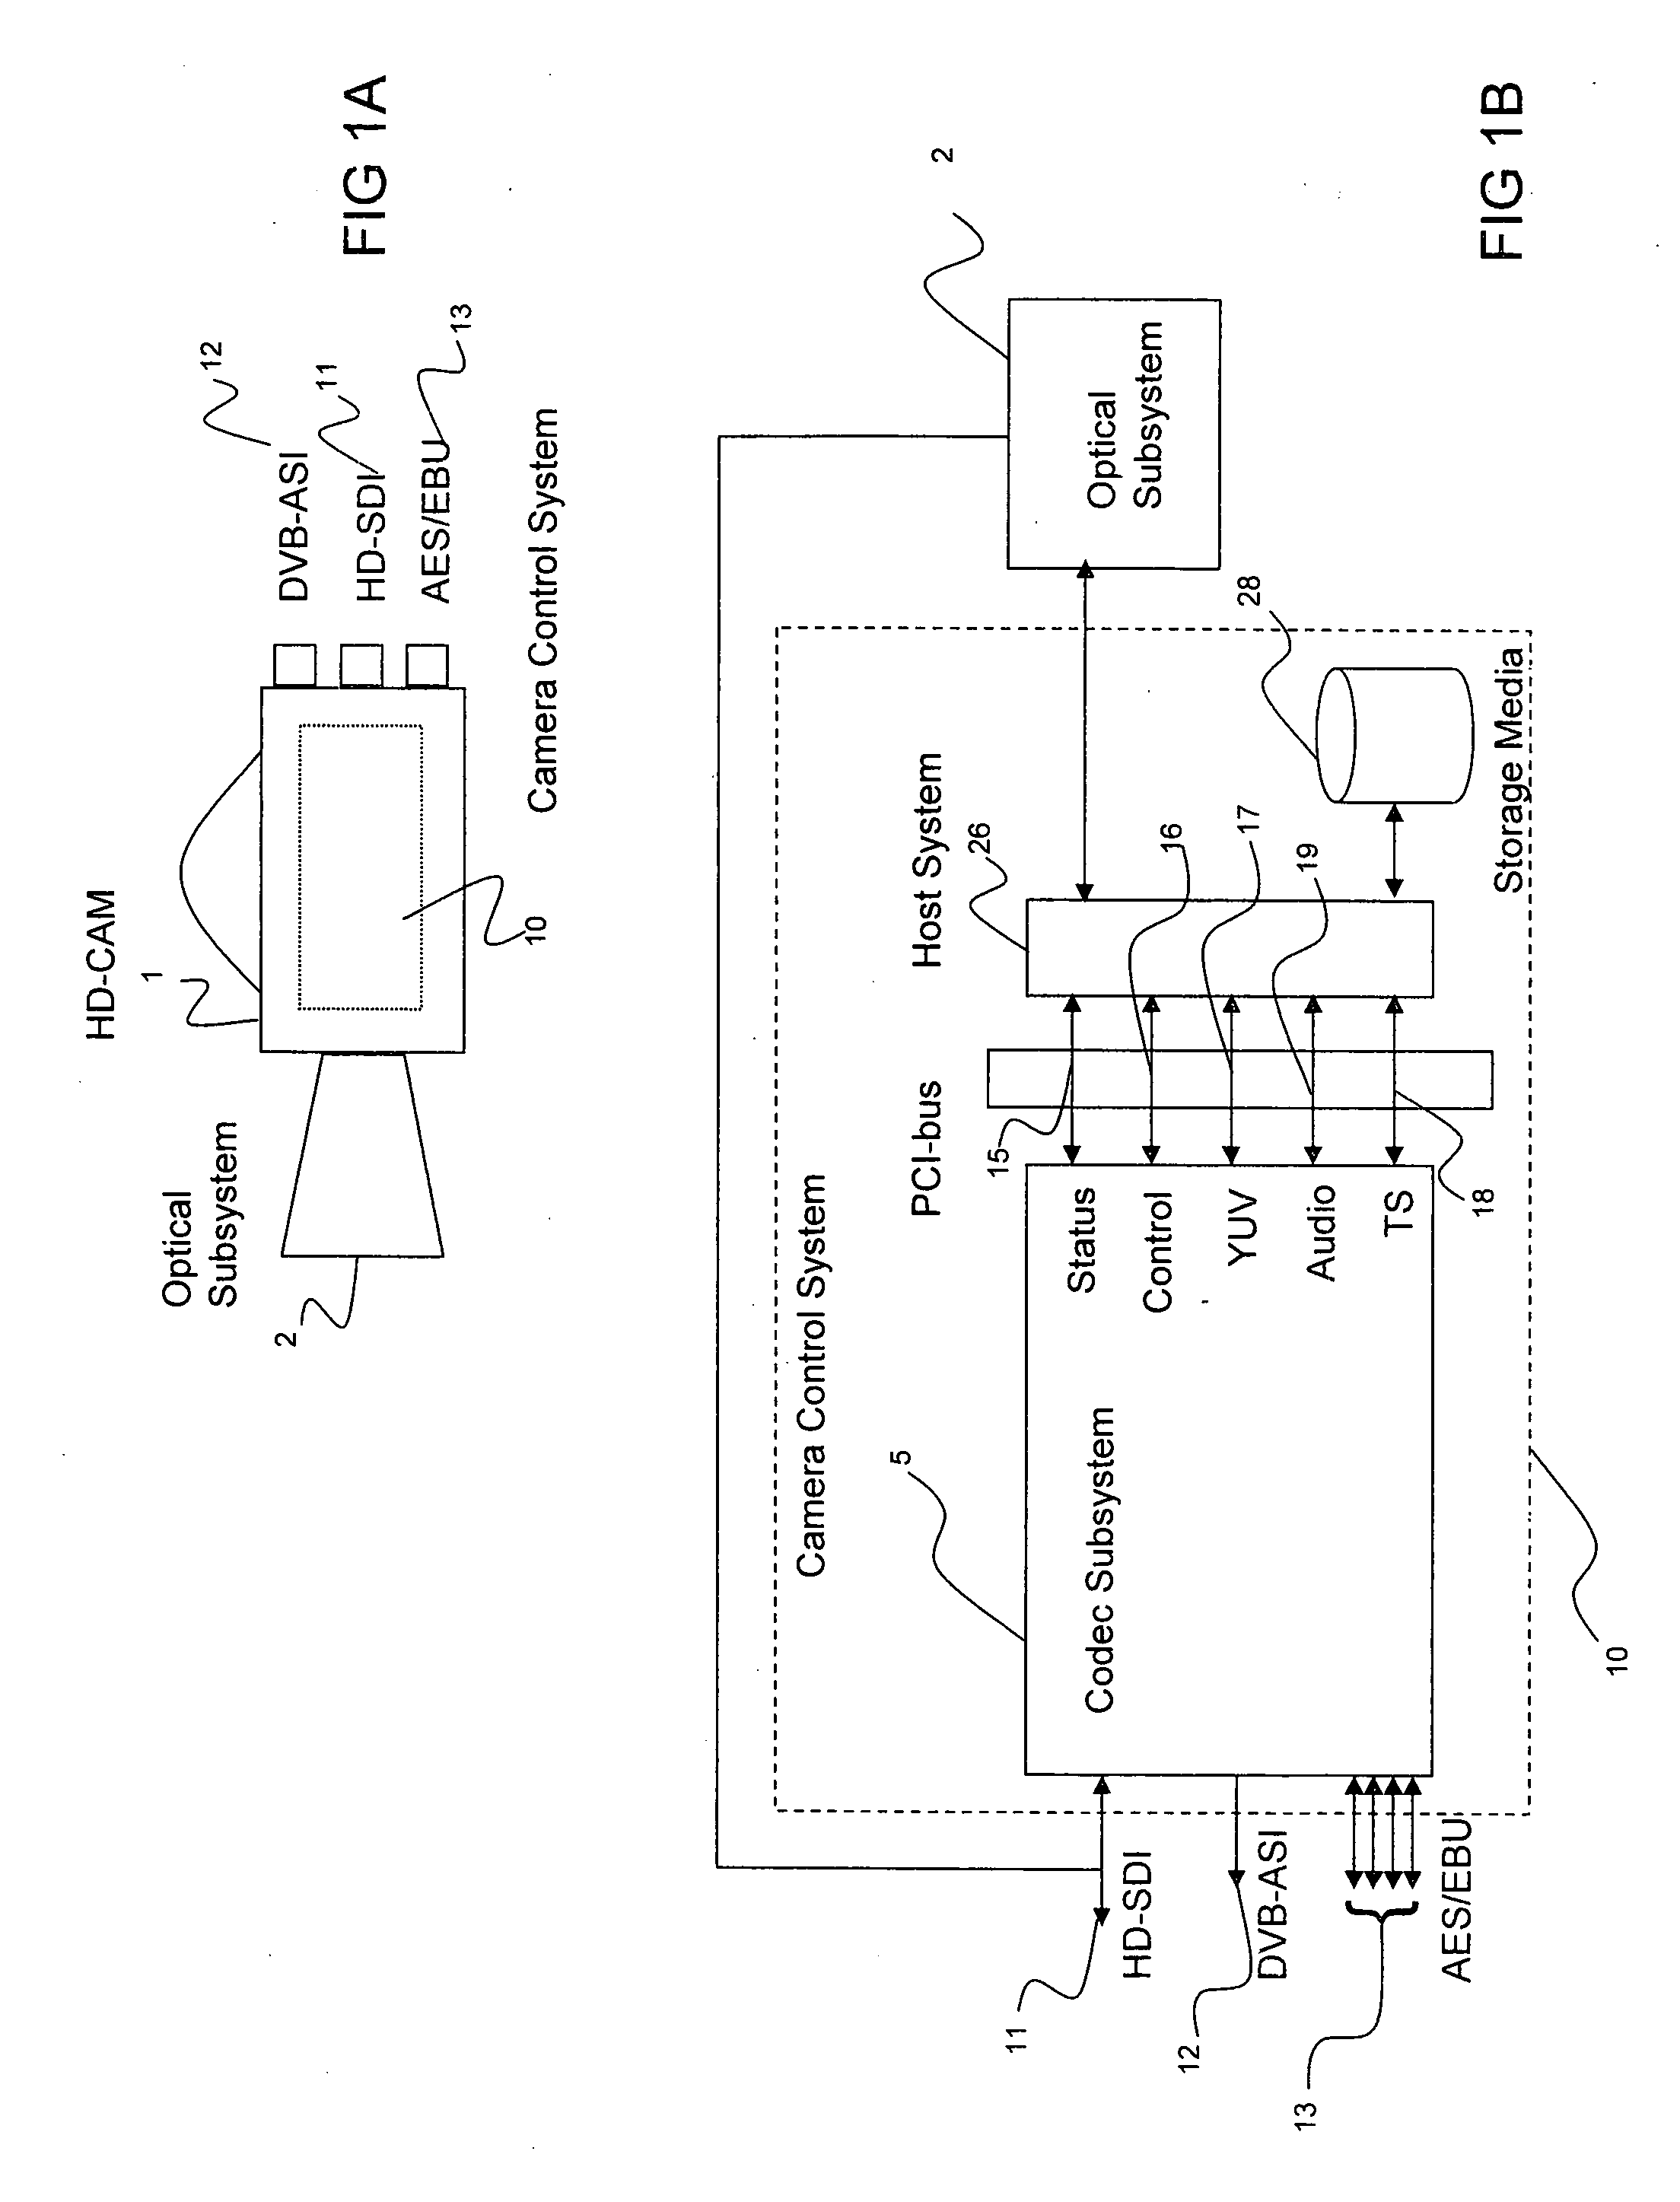 Flexible field based energy efficient multimedia processor architecture and method